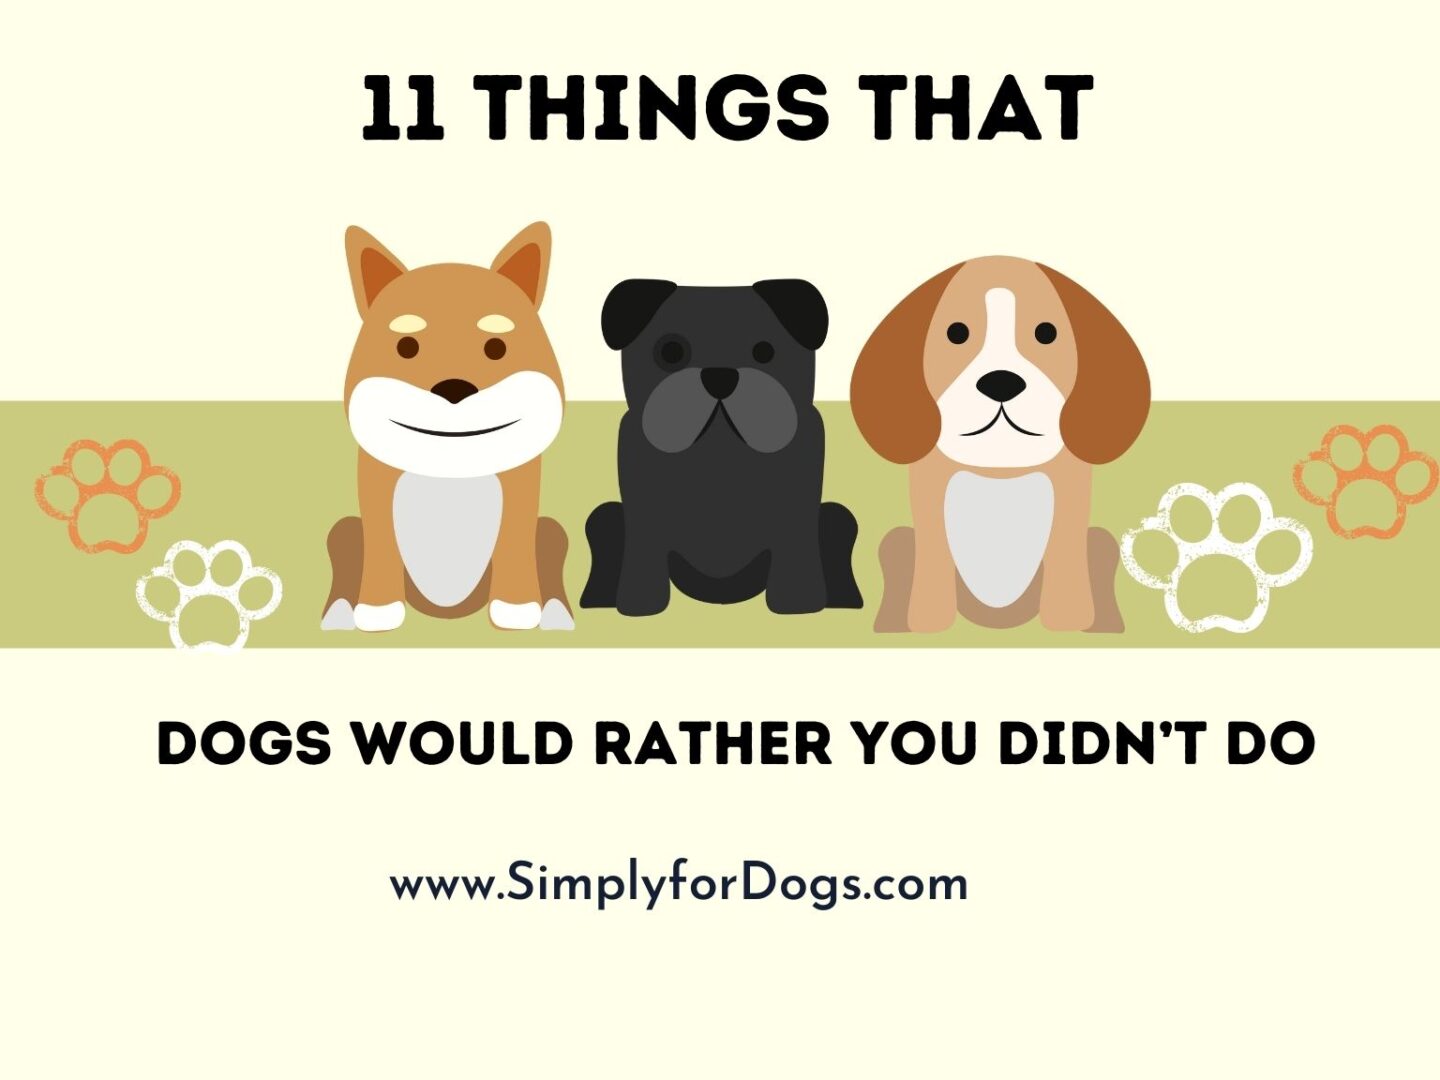 11 Things That Dogs Would Rather You Didn’t Do